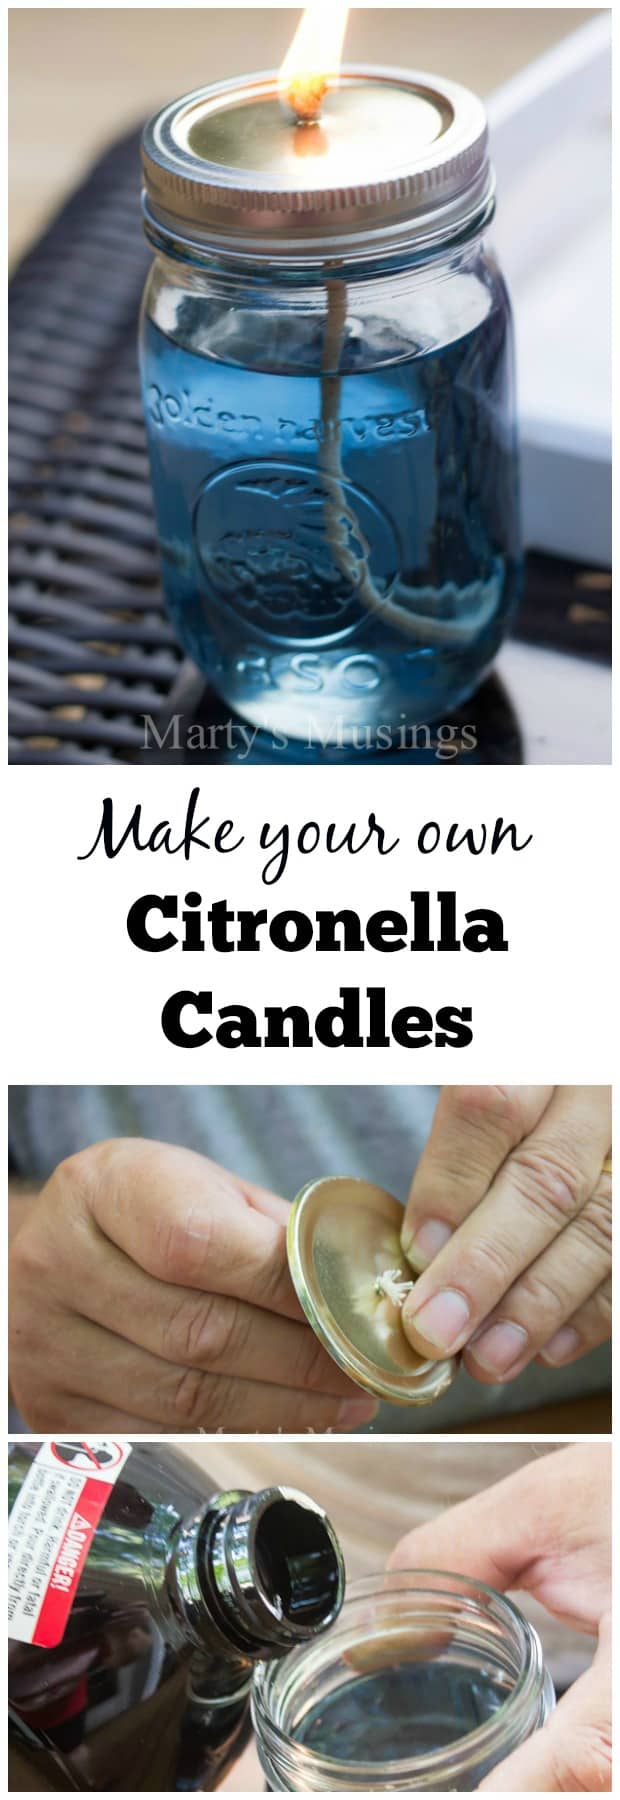 Make your own Citronella Candles - Marty's Musings